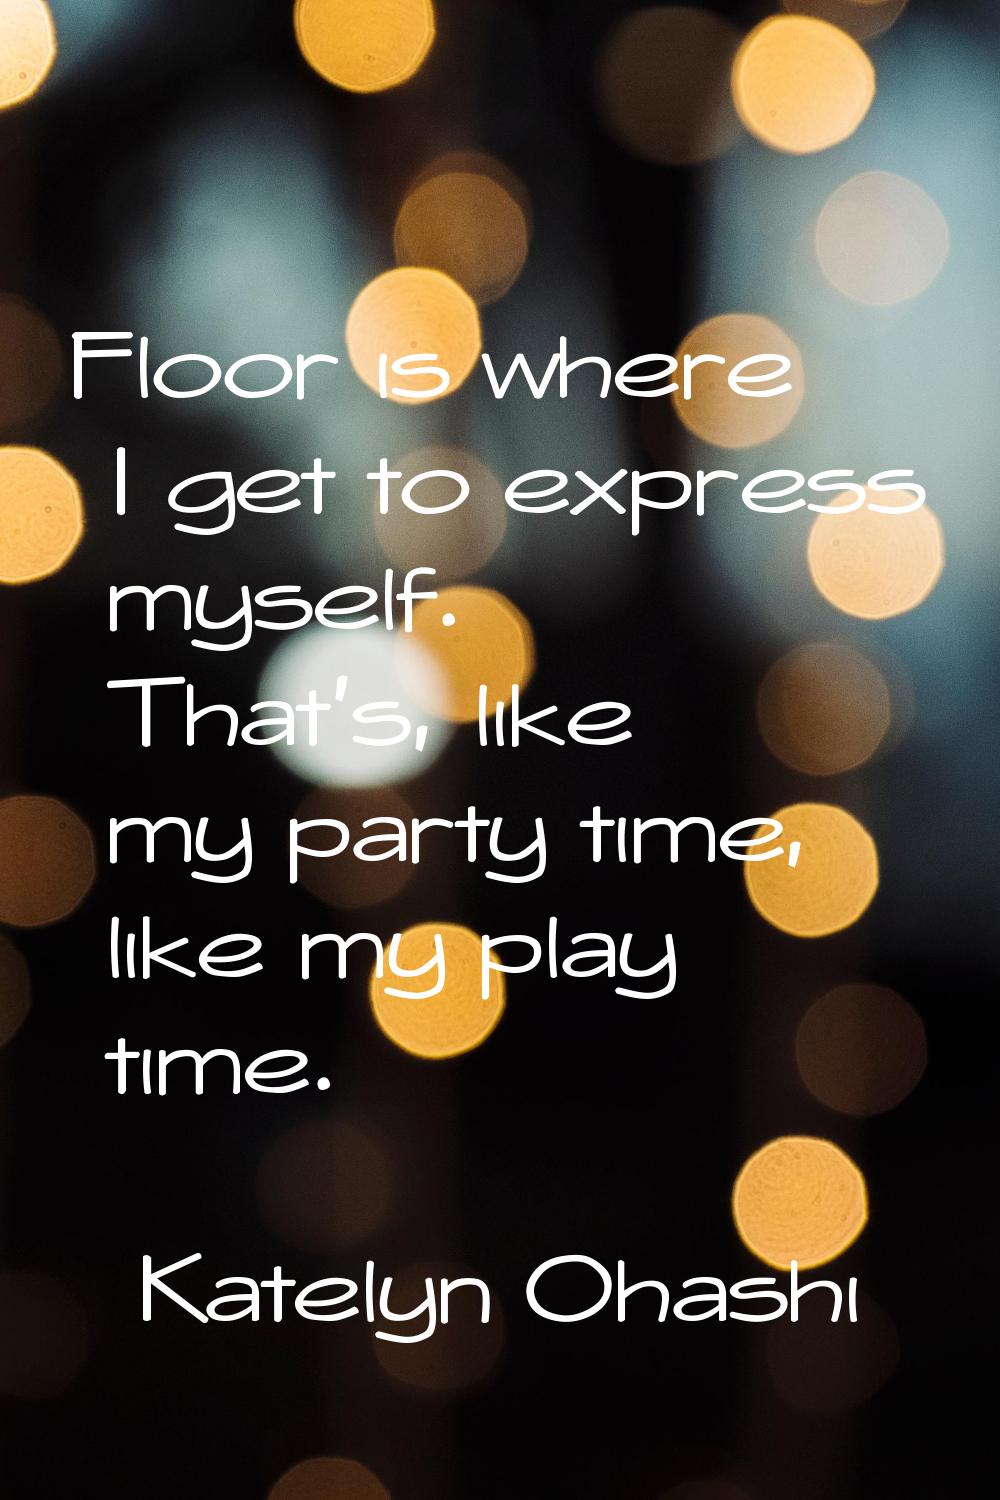 Floor is where I get to express myself. That's, like my party time, like my play time.